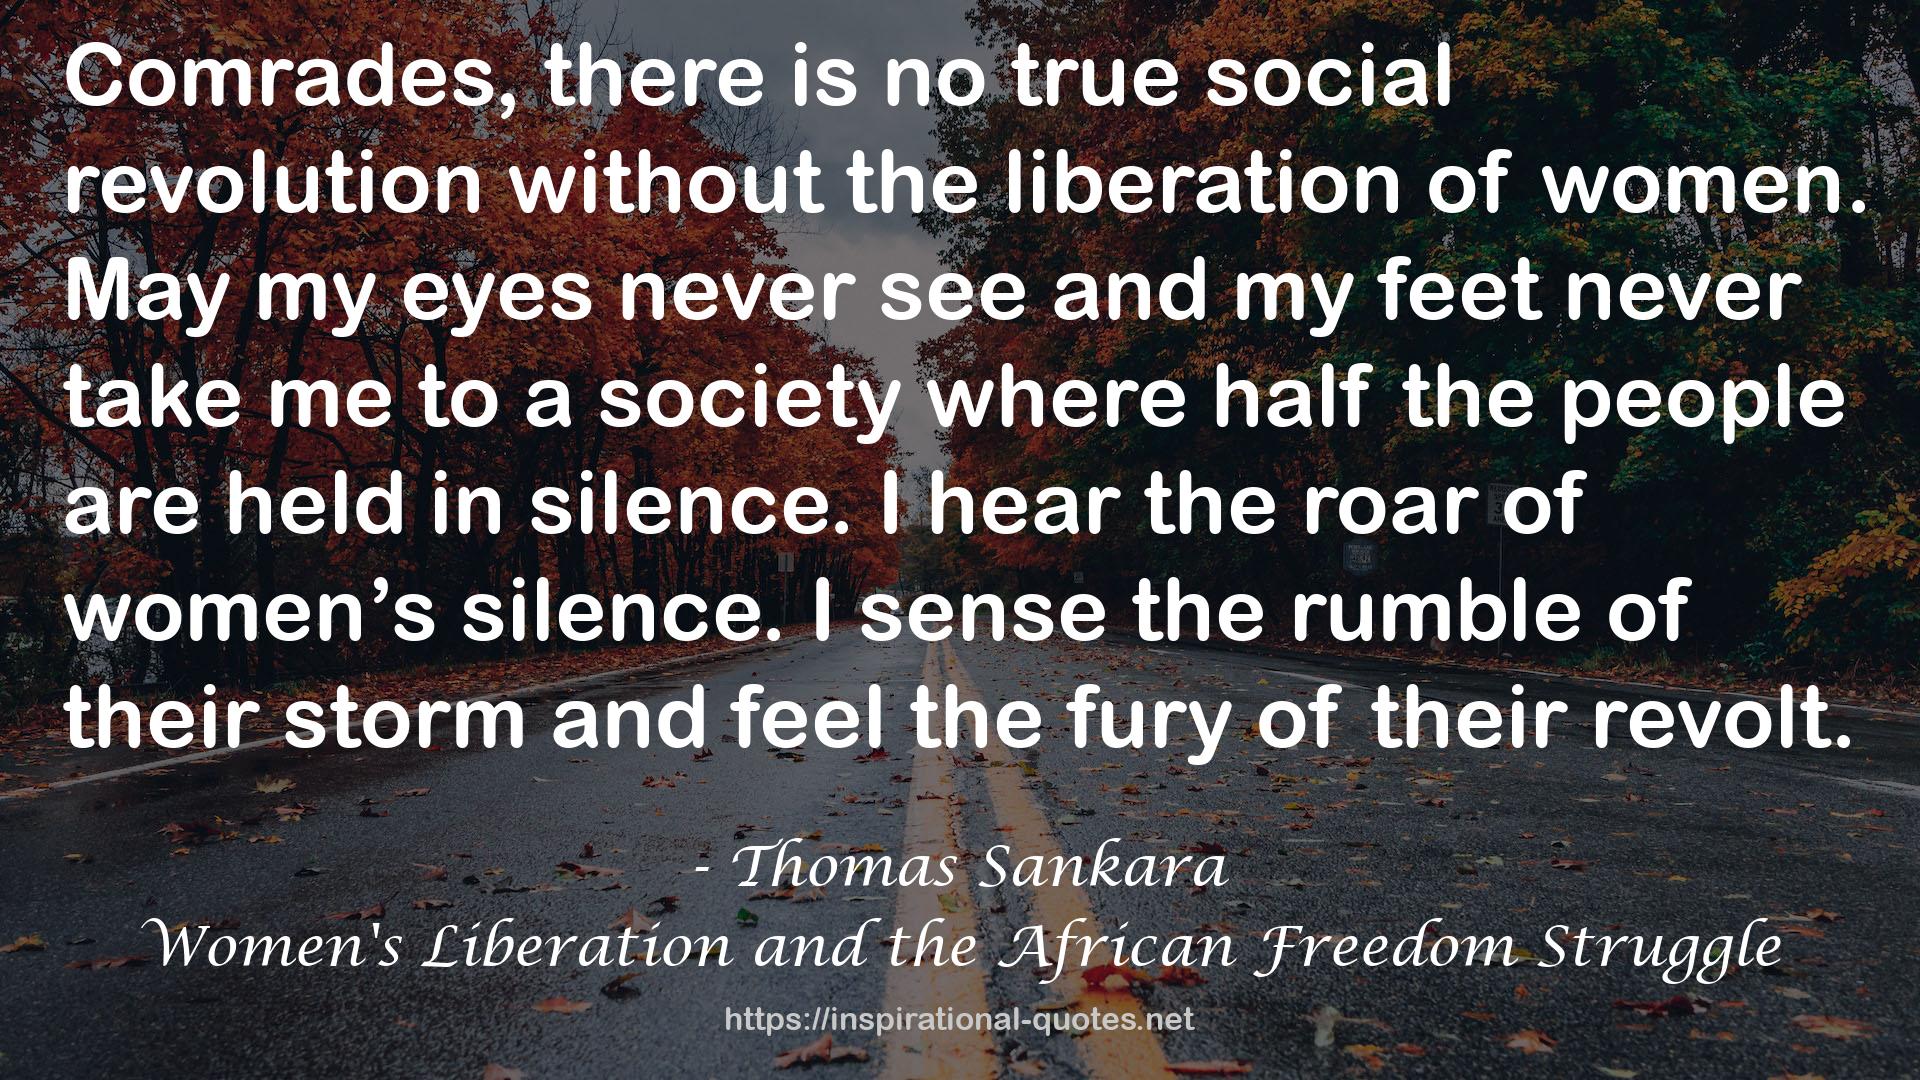 Women's Liberation and the African Freedom Struggle QUOTES